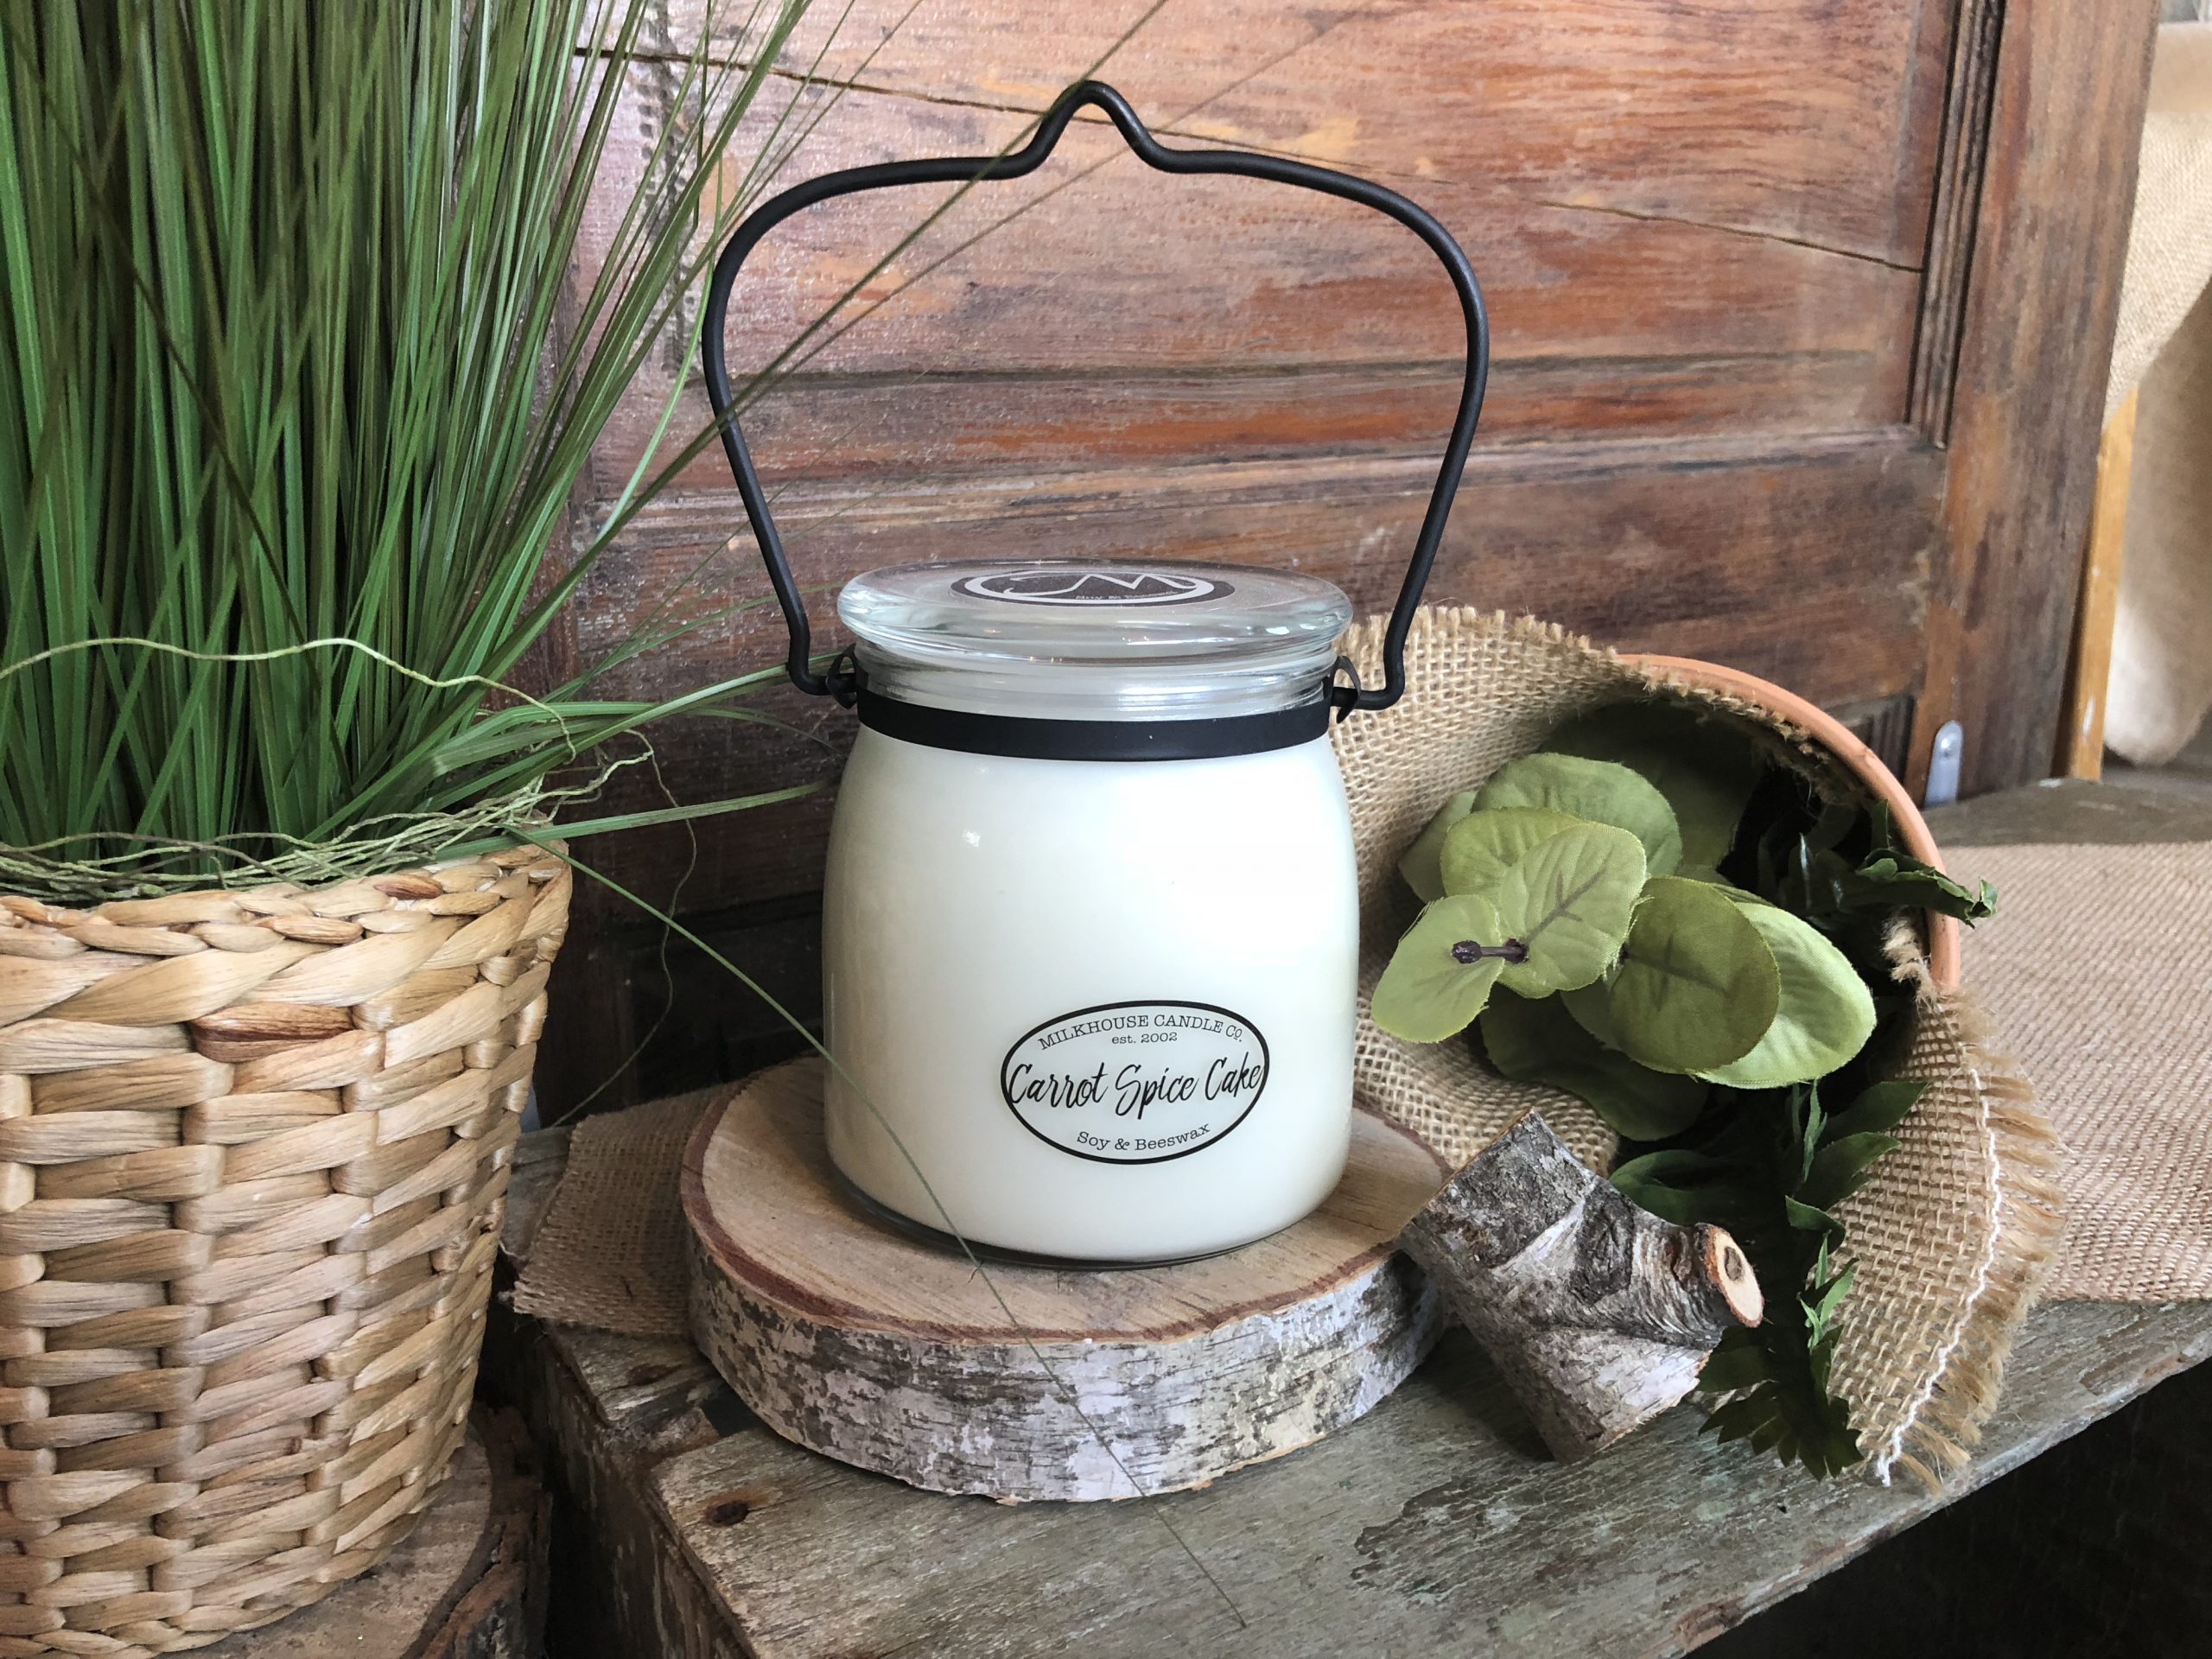 Milkhouse Candle Co. Silver Birch 16 oz. Butter Jar